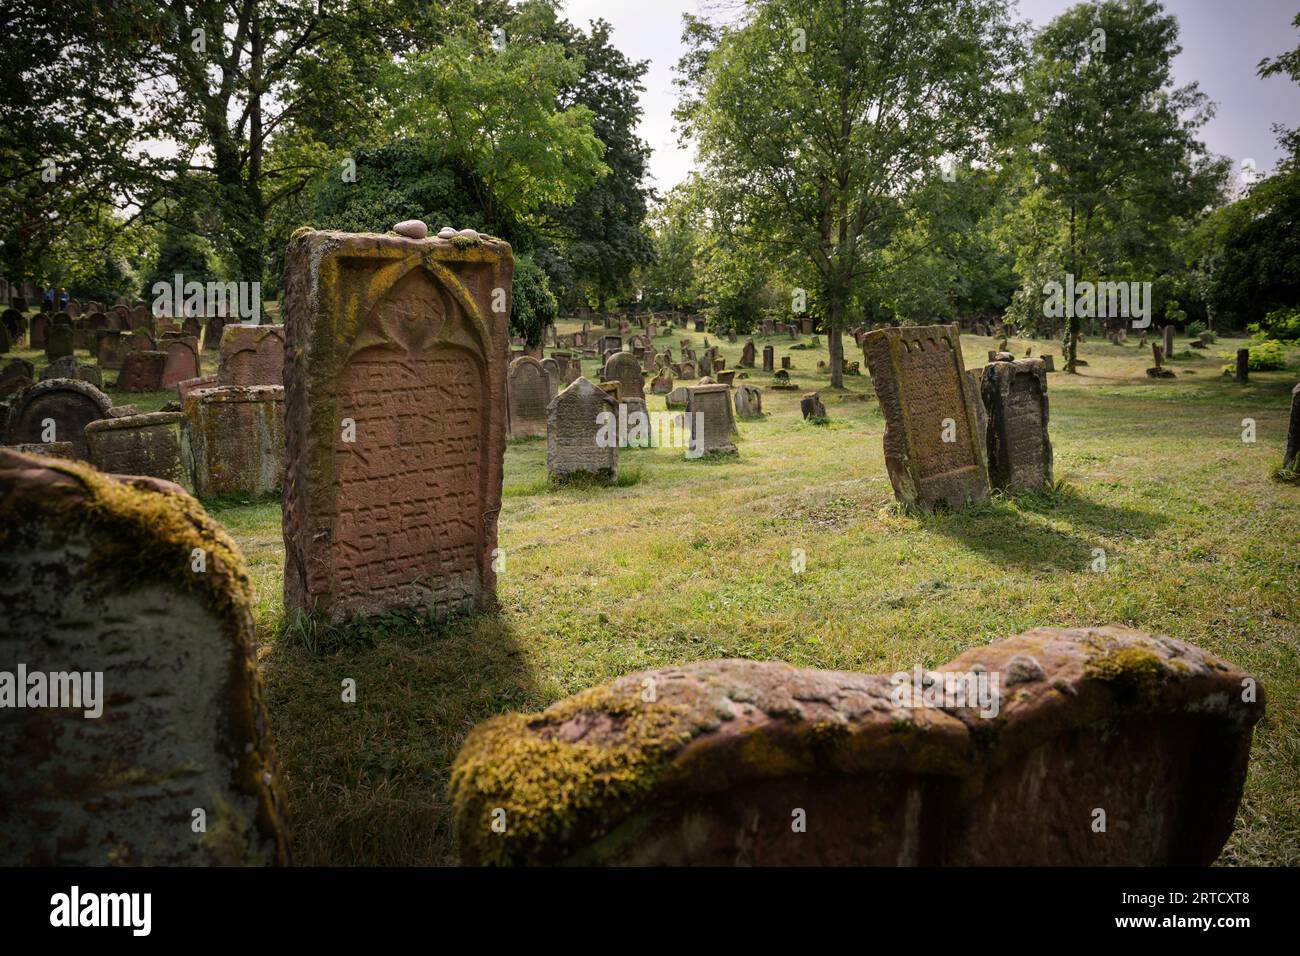 UNESCO World Heritage &quot;SchUM Sites&quot;, medieval tombstones, Jewish Cemetery &quot;Heiliger Sand&quot;, Worms, Rhineland-Palatinate, Germany, E Stock Photo